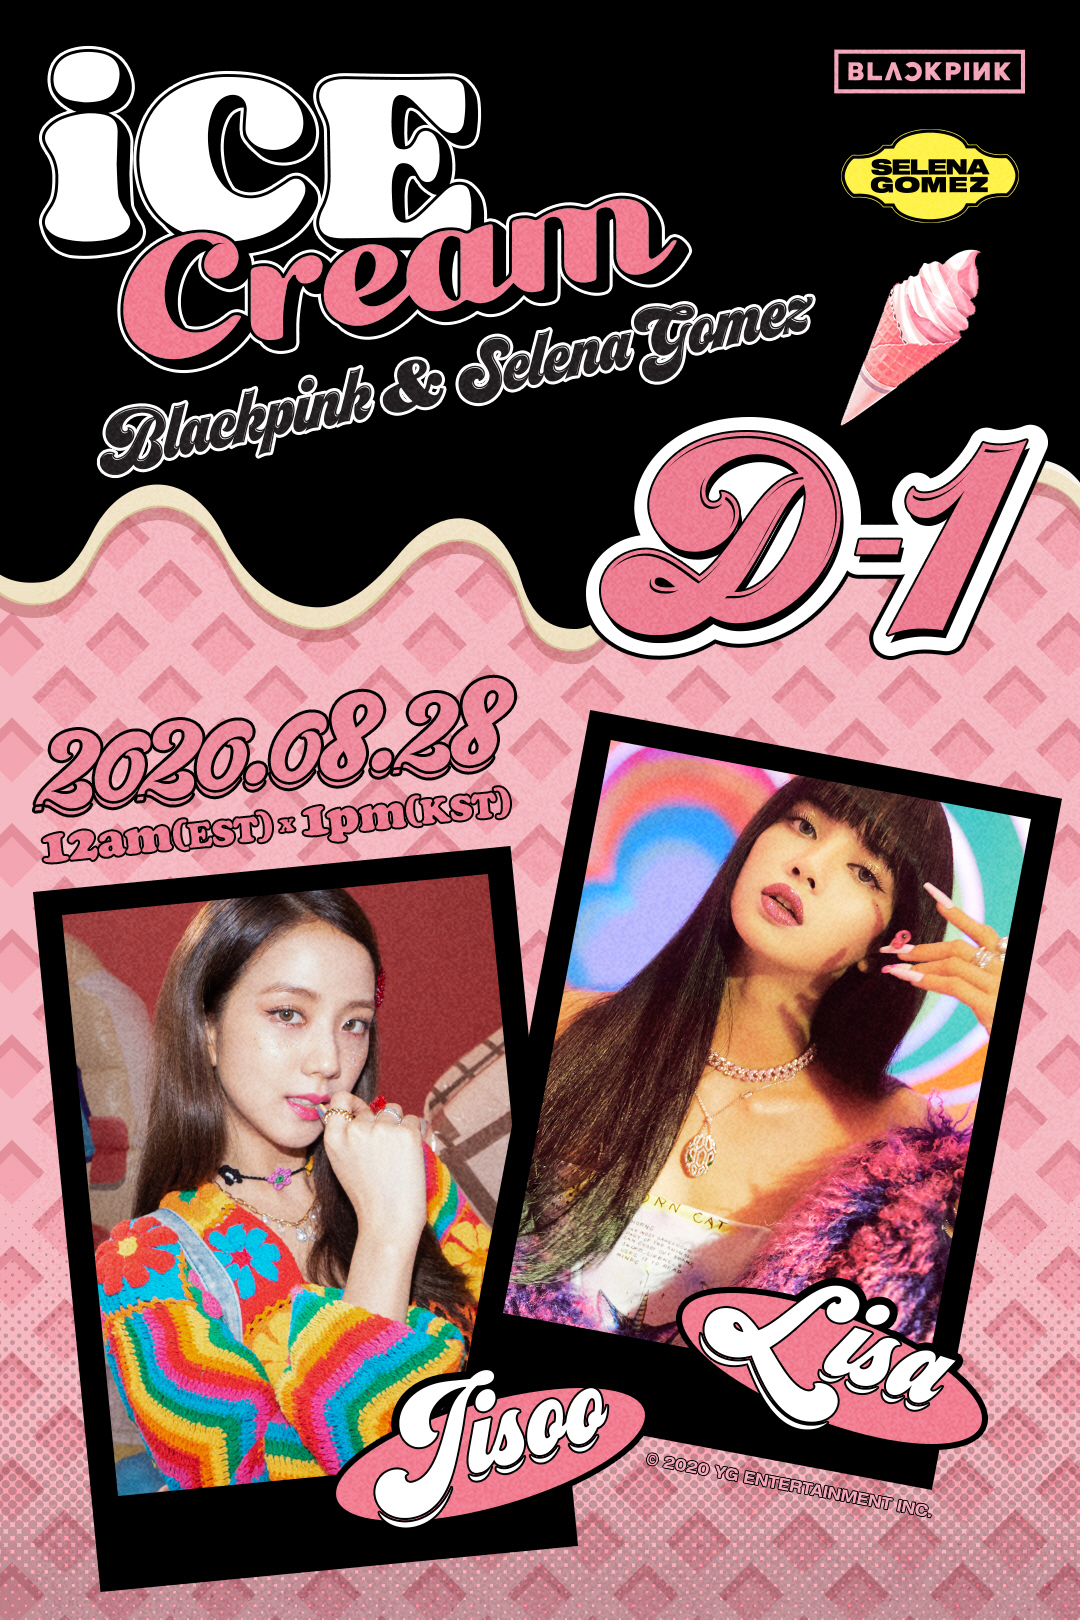 BLACKPINK is ready to melt the hearts of global music fans with a new song Ice Cream with Selena Esperanza Gomez.YG Entertainment posted a Ice Cream D-1 poster with four BLACKPINK on its official blog at 1 pm on the 27th, and announced their worldwide comeback just one day ahead.BLACKPINK members in the poster caught the eye with their lively expressions and eyes.In addition, the colorful costume that matches the sweet atmosphere ice cream background perfectly digested, each charm showed a fresh and romantic aspect.BLACKPINK released the music video teaser of Ice Cream earlier this morning, raising the expectation of music fans to the highest level.The news that Selena Esperanza Gomez participated in music videos as well as Ice Cream soundtracks attracted great attention among global fans and expected the authenticity and musical perfection of this previous Collaboration.YG has maintained thorough security while minimizing the promotion of Ice Cream teaser contents.It is only a very cool music that goes well with a hot summer and predicted differentiation from BLACKPINKs existing hits Kill This Love and How You Like That.BLACKPINKs Ice Cream will be released at 0:00 on August 28 and 1:00 pm on the same day in Korea.YG and the worlds largest music group Universal Music are working together to focus on the global music market, so it is noteworthy what kind of repercussions will be made.